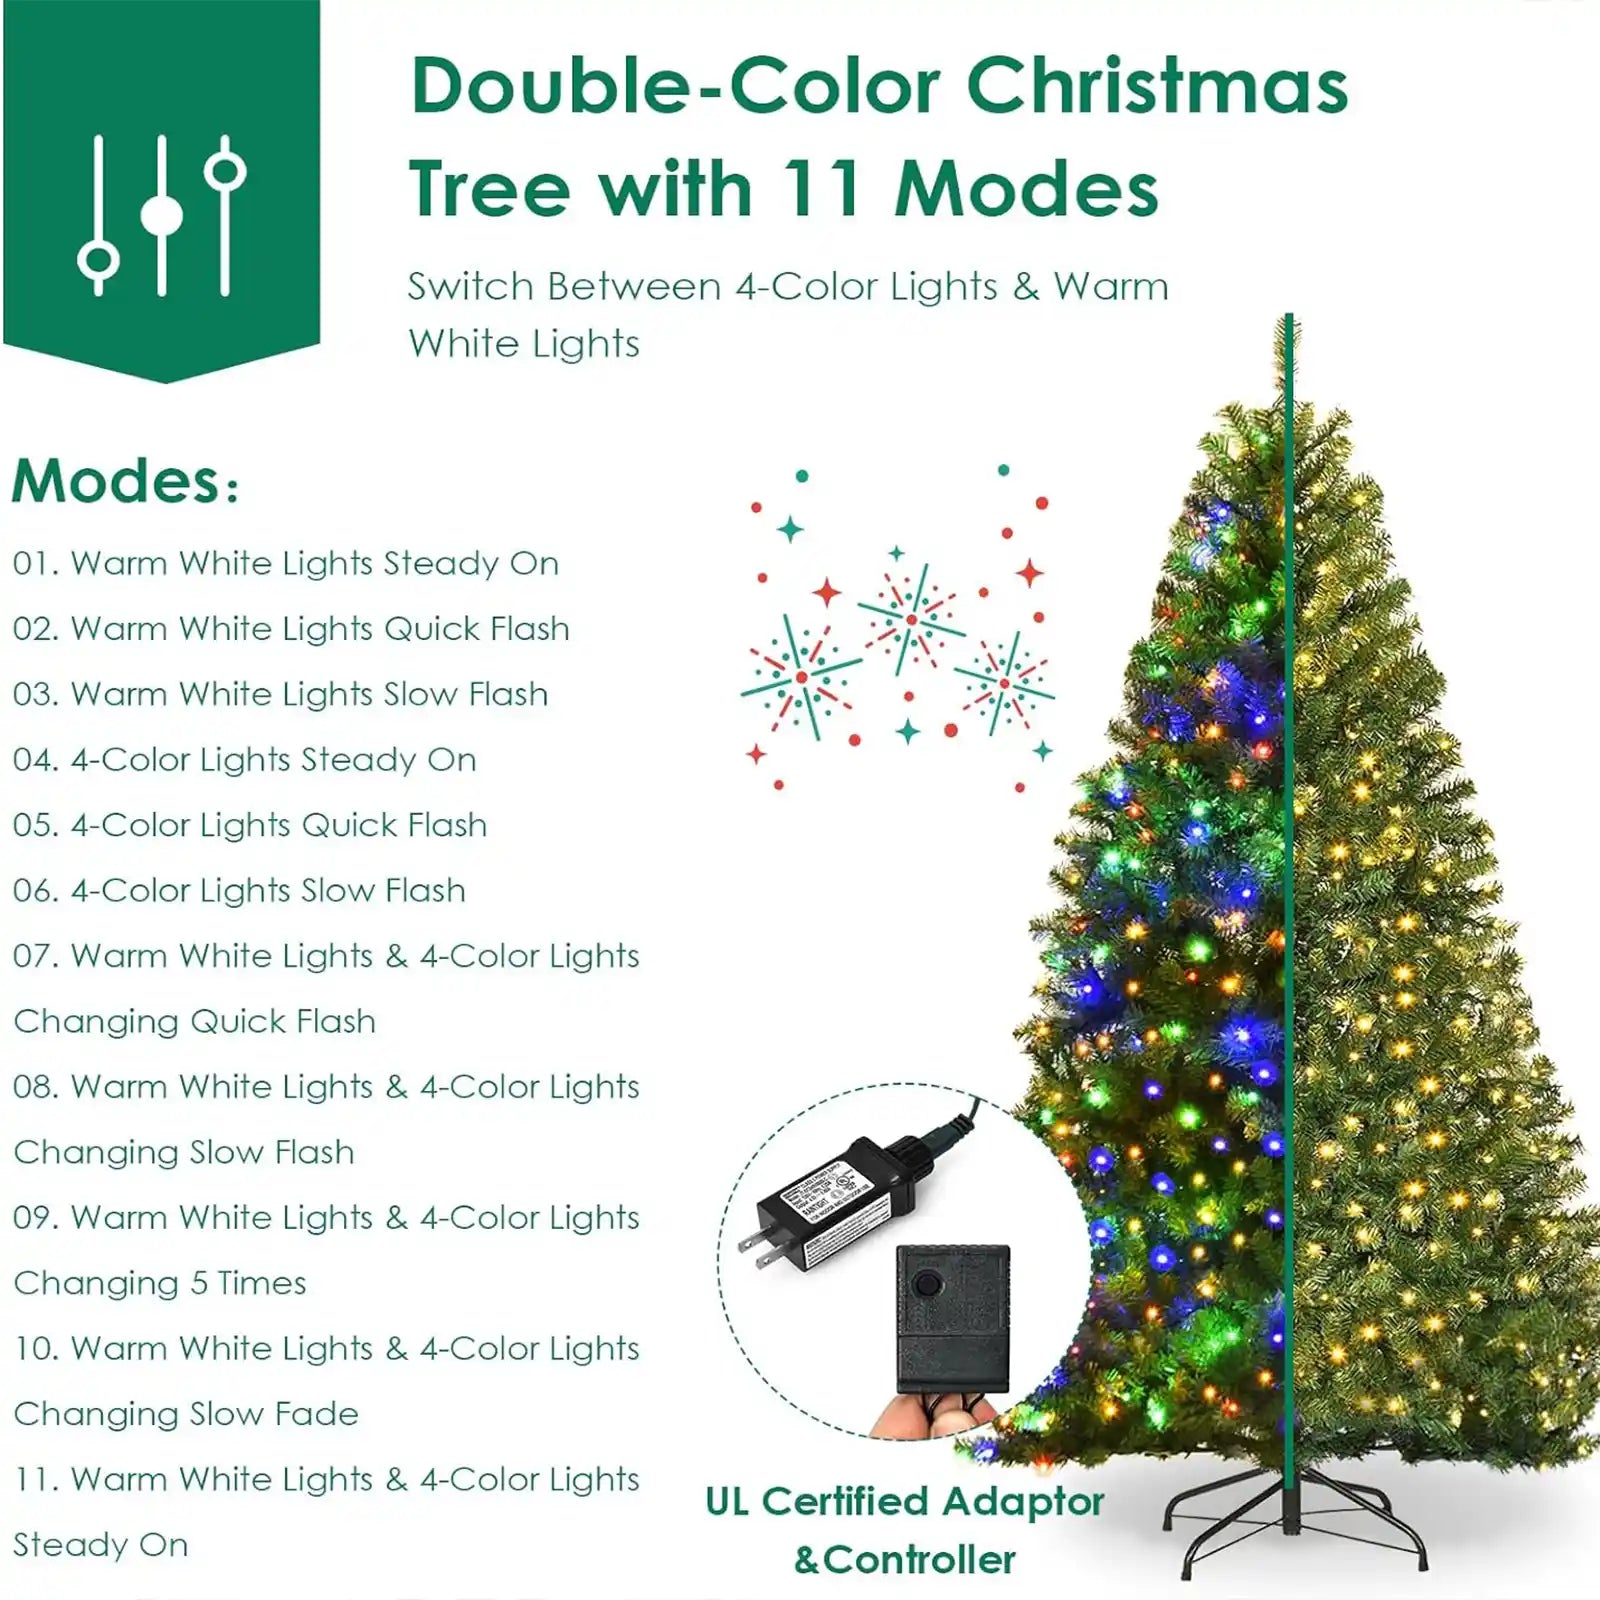 8FT Prelit Christmas Tree with Light Multicolor LED & Warm White Color with 2129 Branches Tips Full Appearance for Holiday, Party & Home Decoration